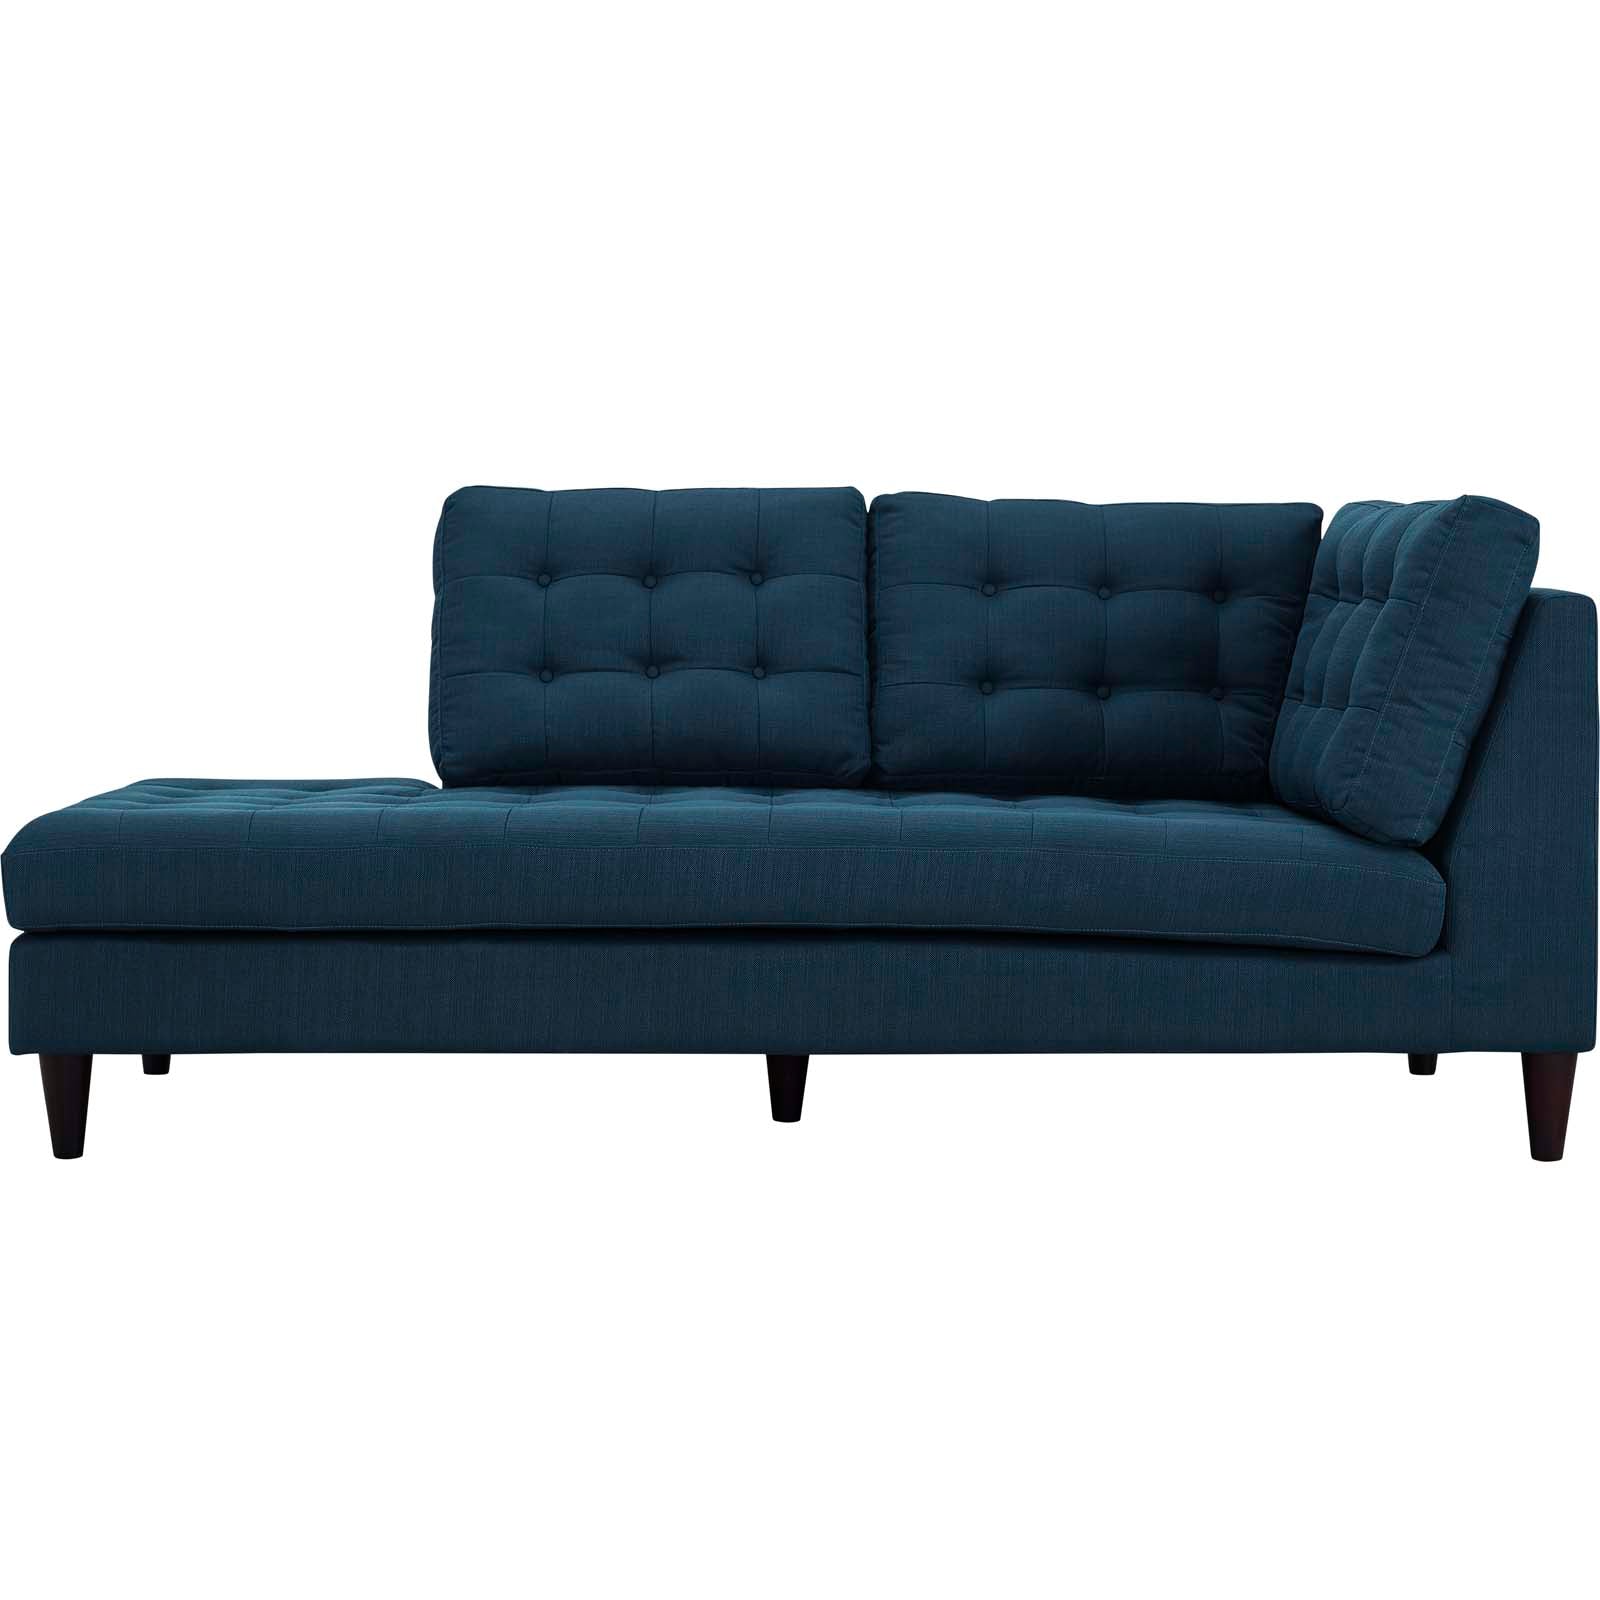 Modway Sofas & Couches - Empress Upholstered Fabric Left Facing Bumper Azure